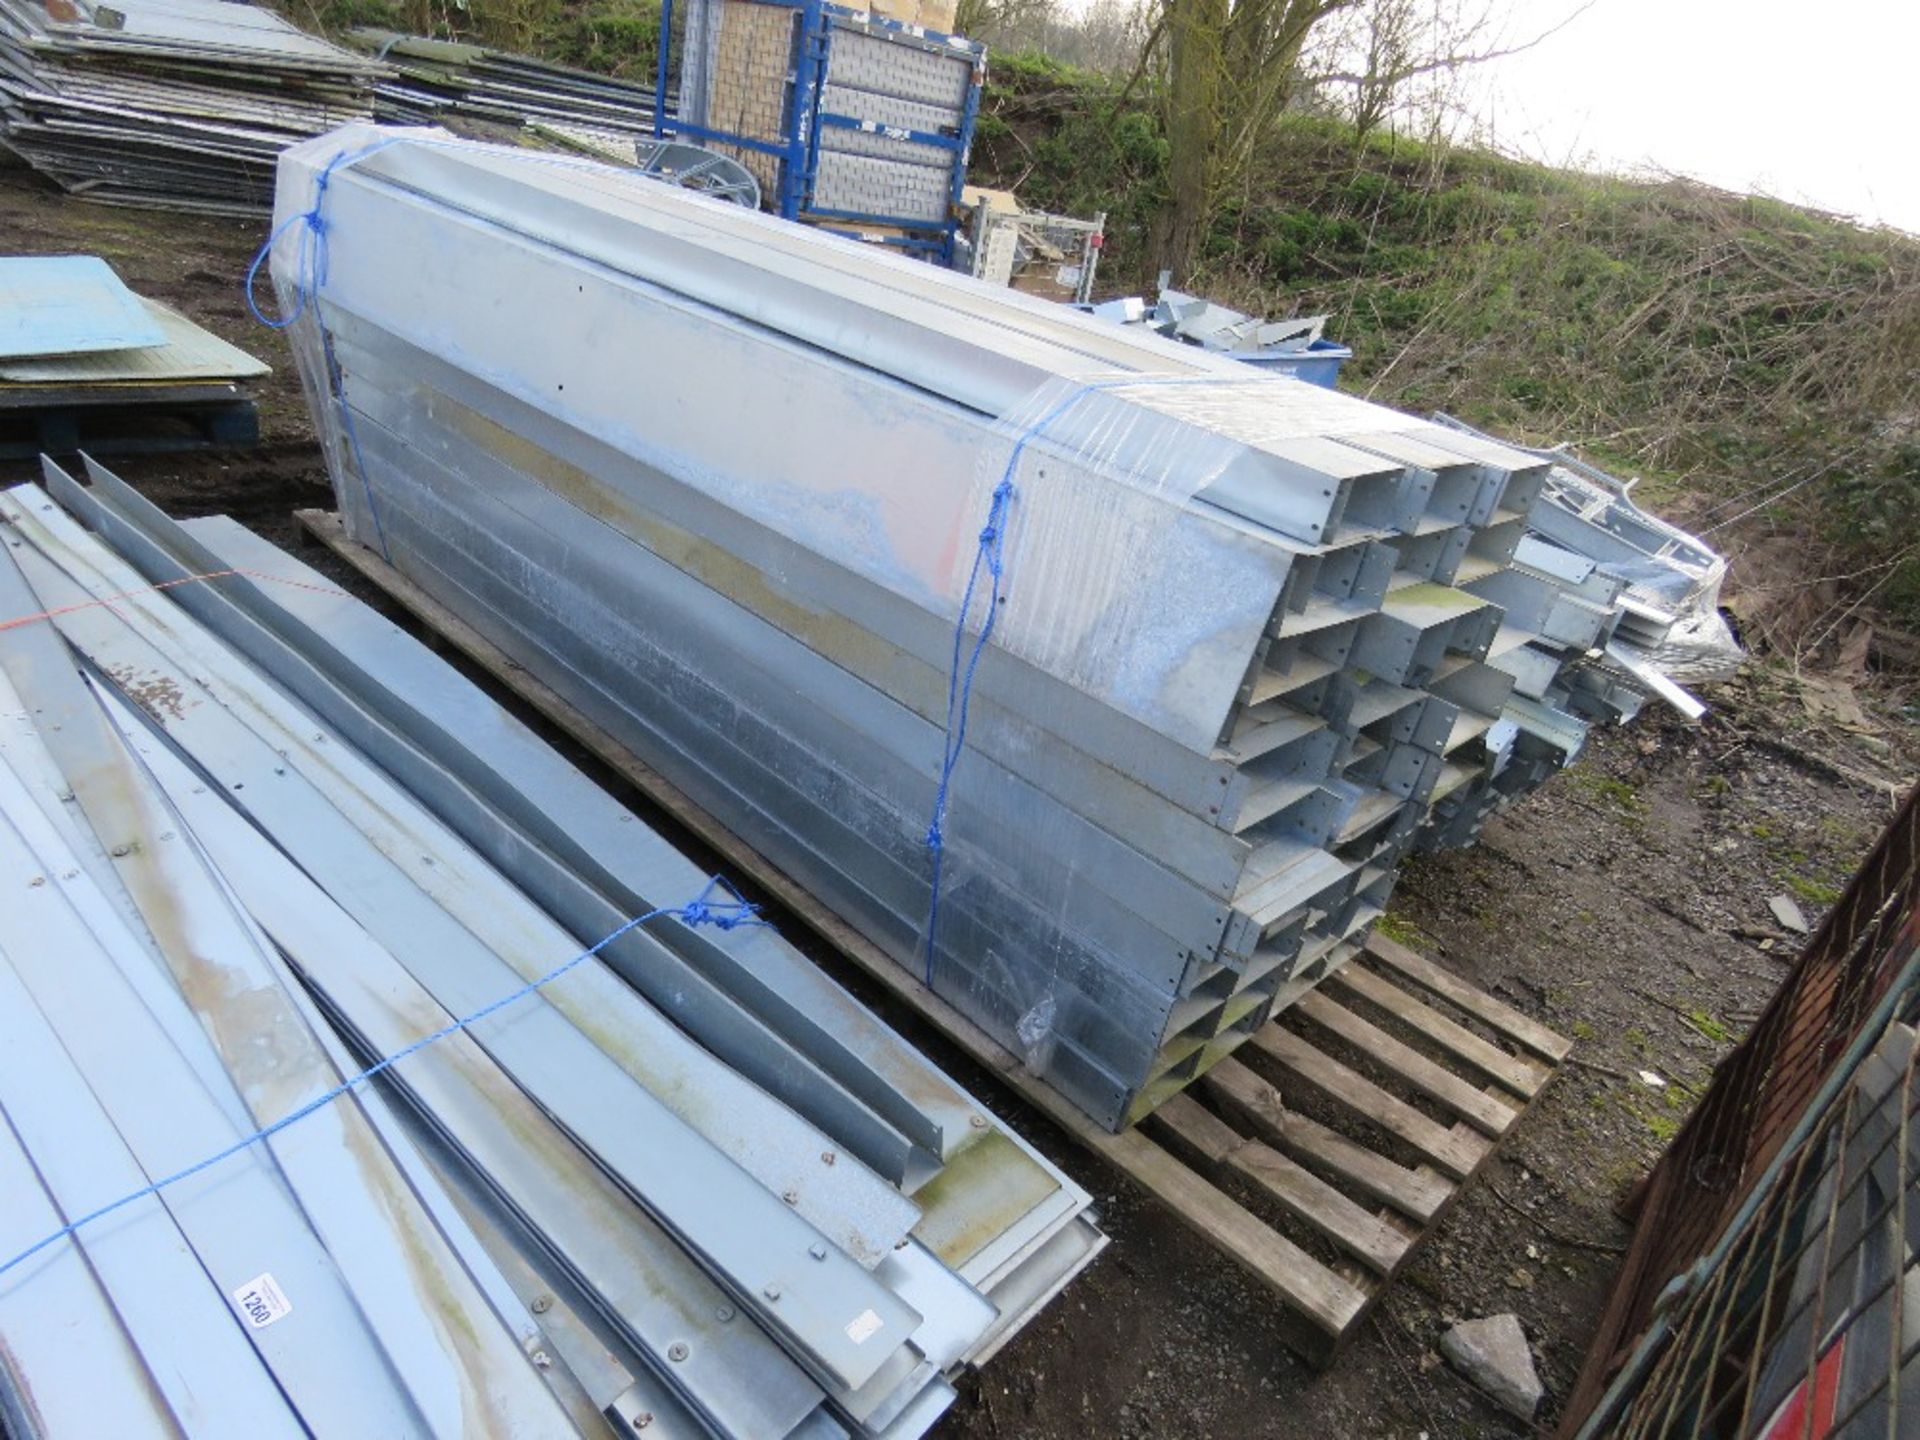 LARGE QUANTITY OF METAL DUCTING PARTS INCLUDING DUCTS AT 9FT LENGTH APPROX. SOURCED FROM COMPANY LIQ